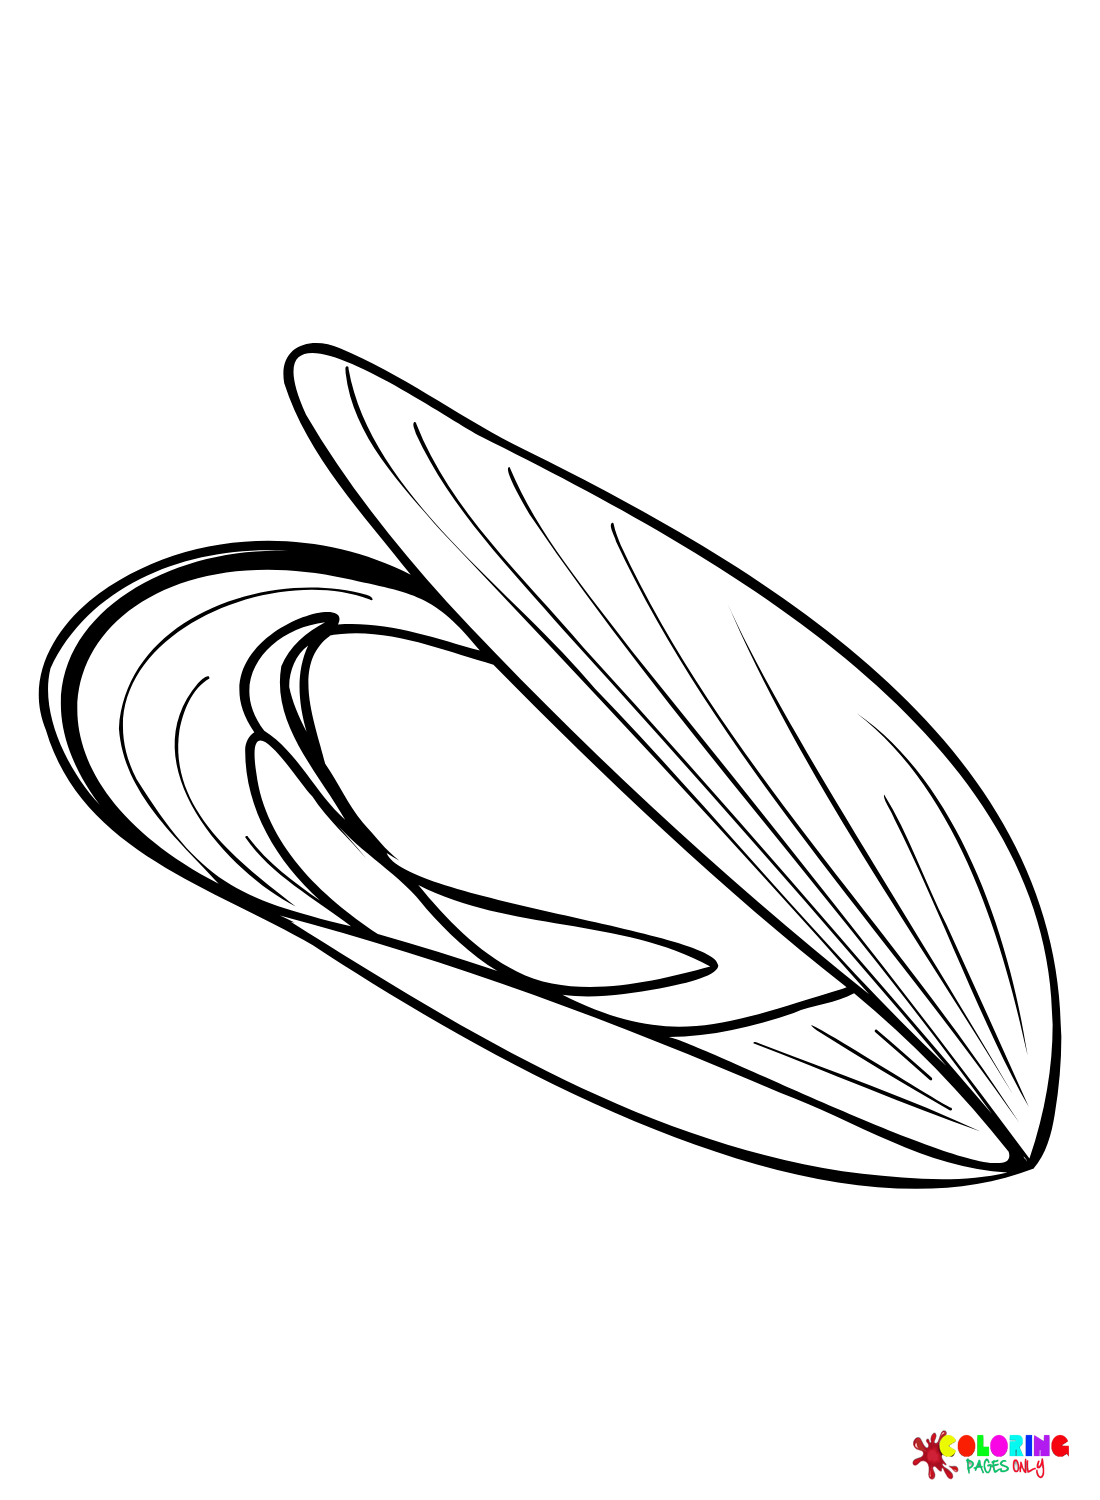 Mussel Clam Coloring Page